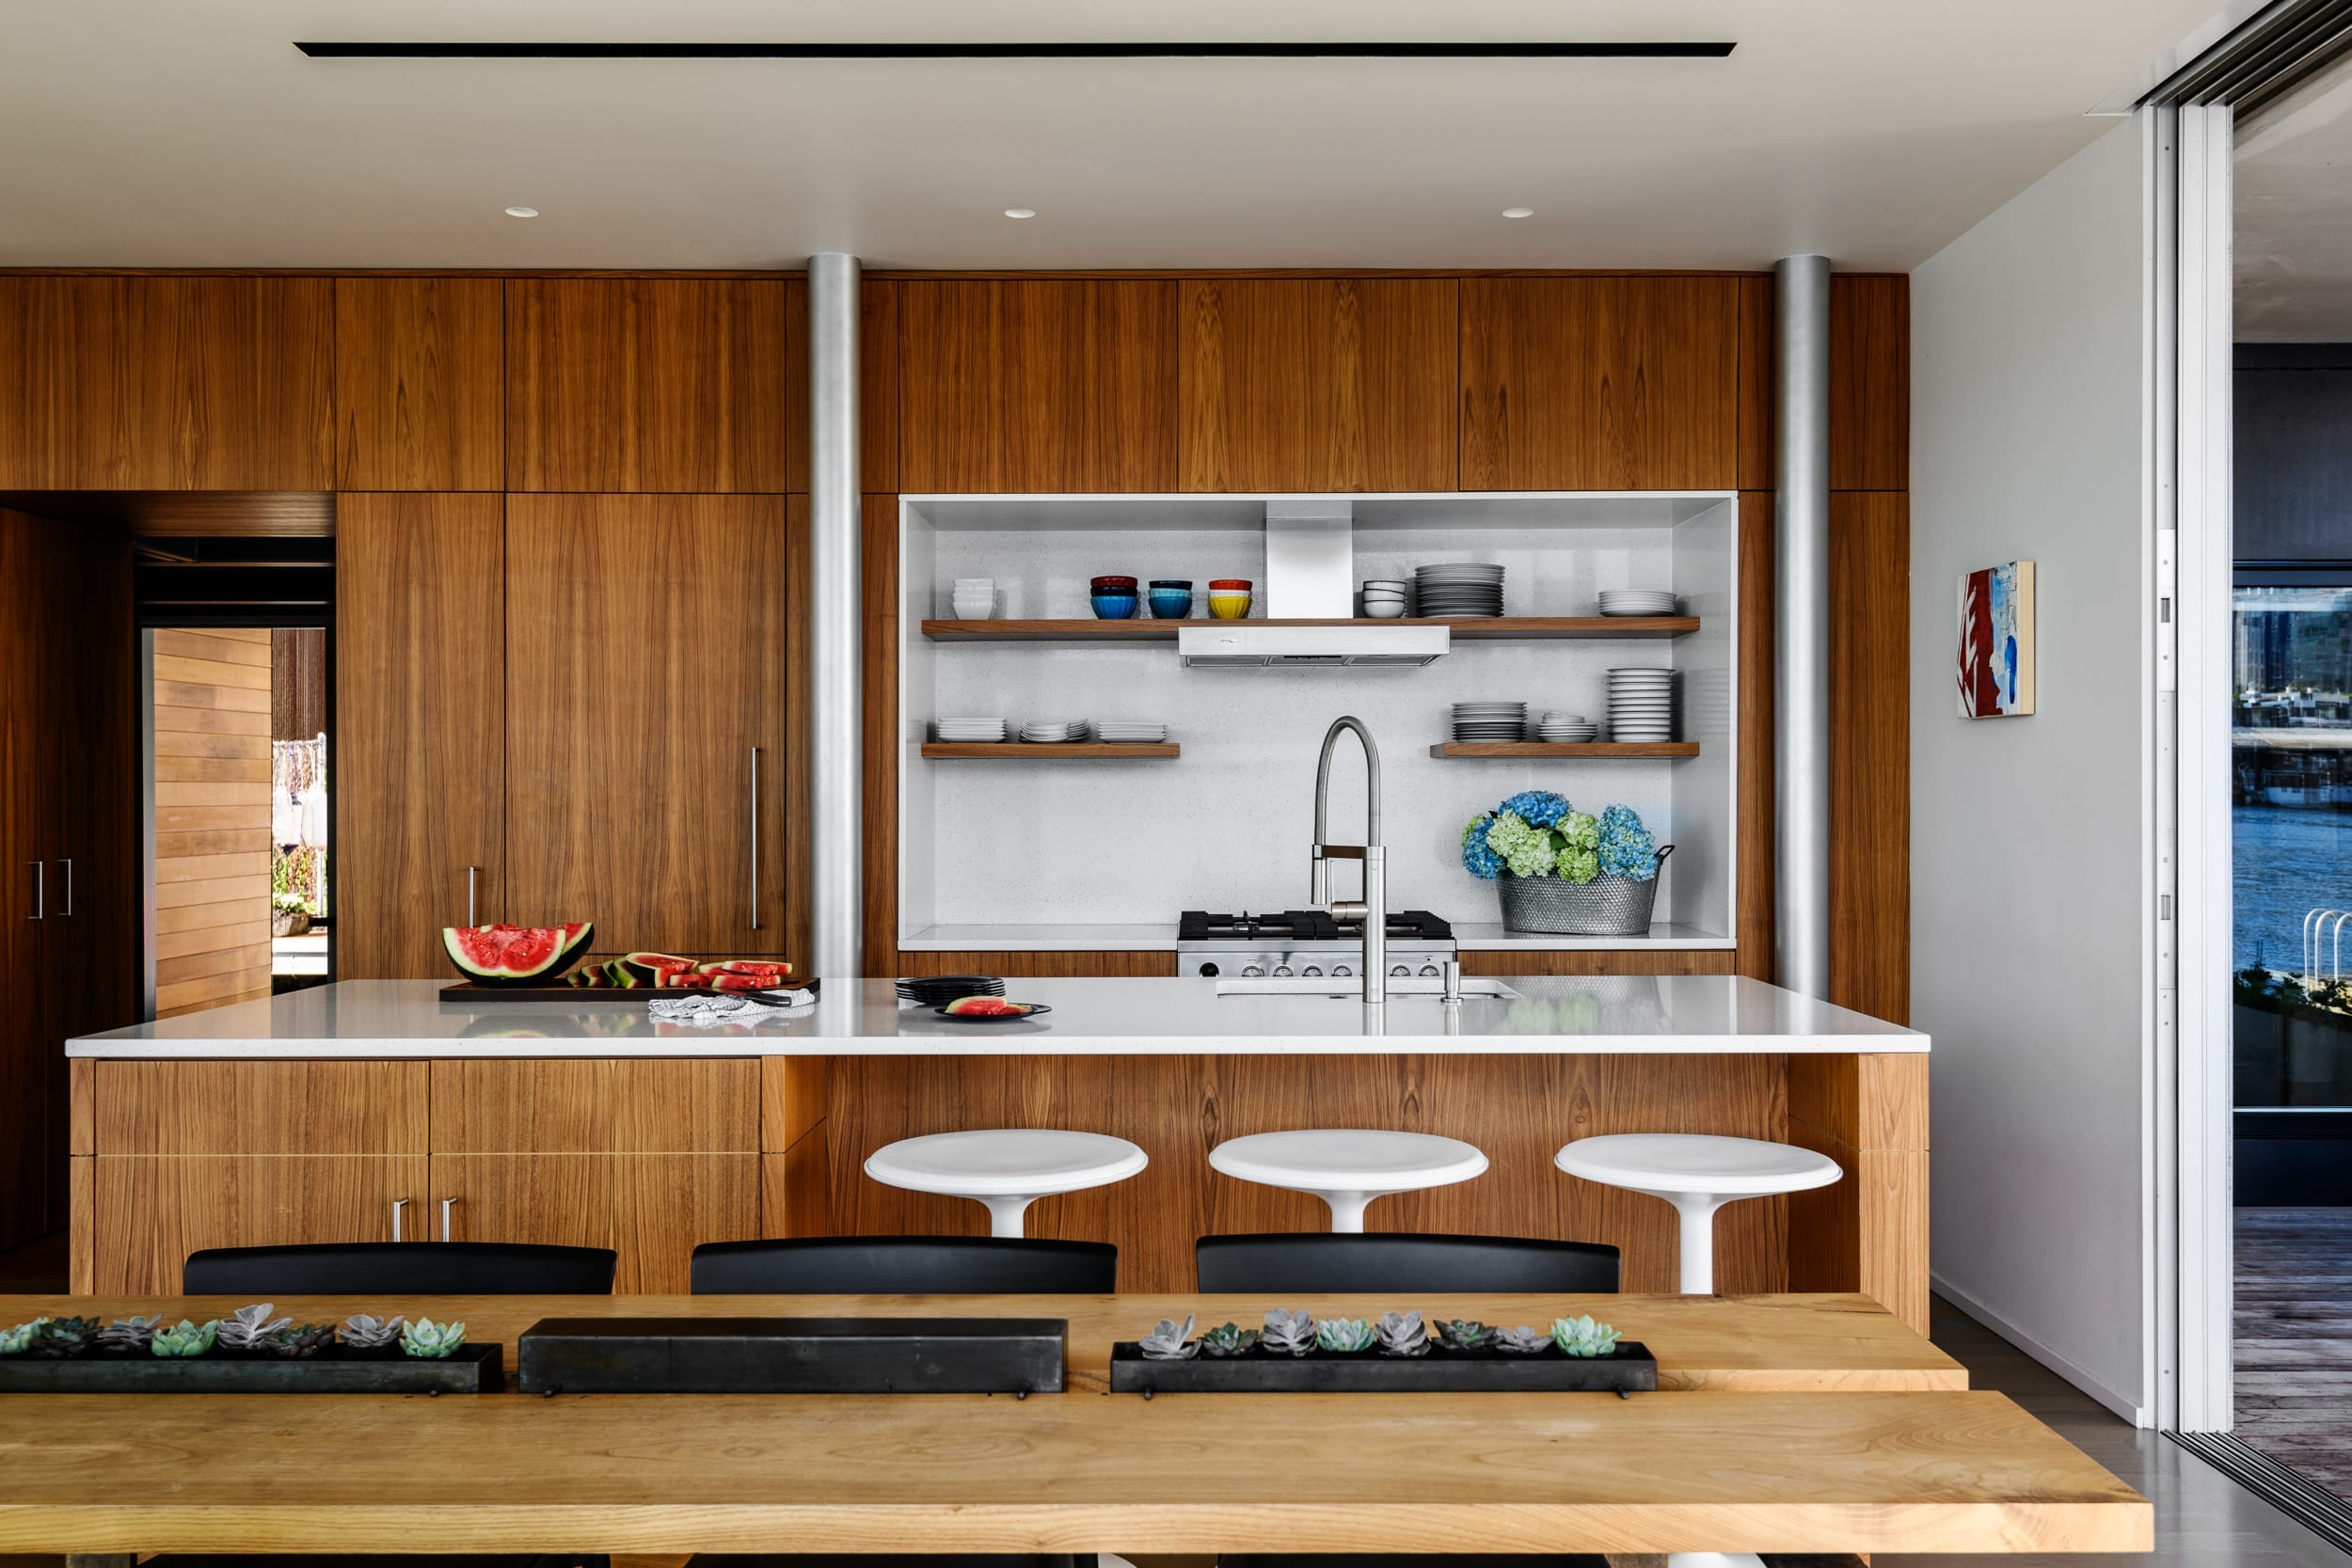 A modern kitchen with a wooden table and chairs.